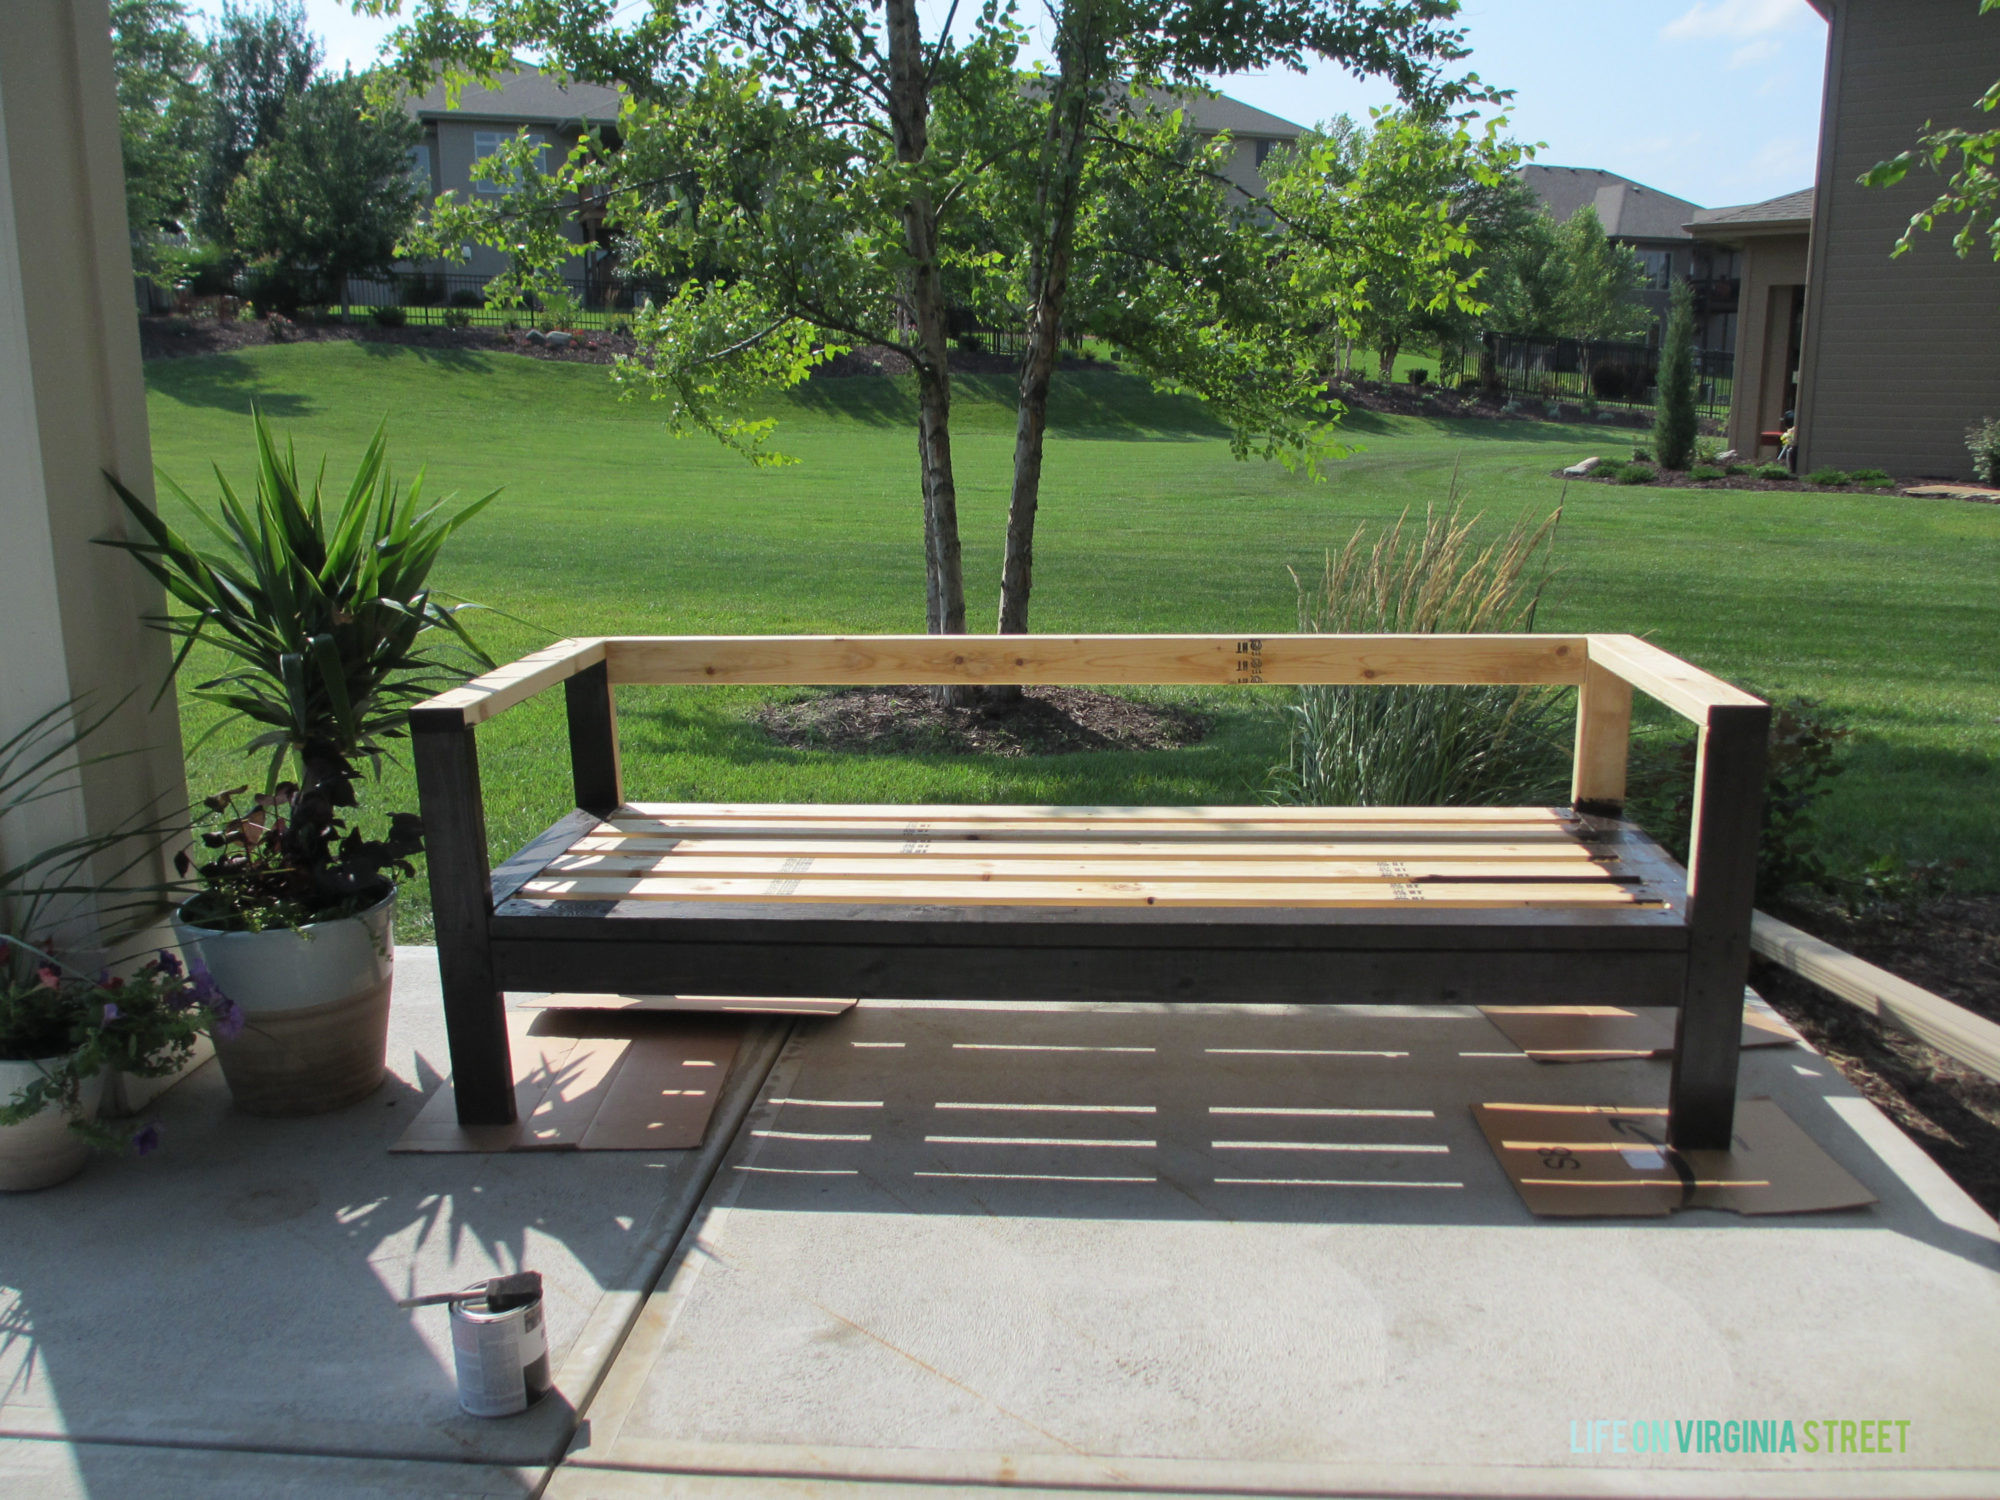 DIY Outdoor Sectional Sofa
 How to Build a DIY Outdoor Couch